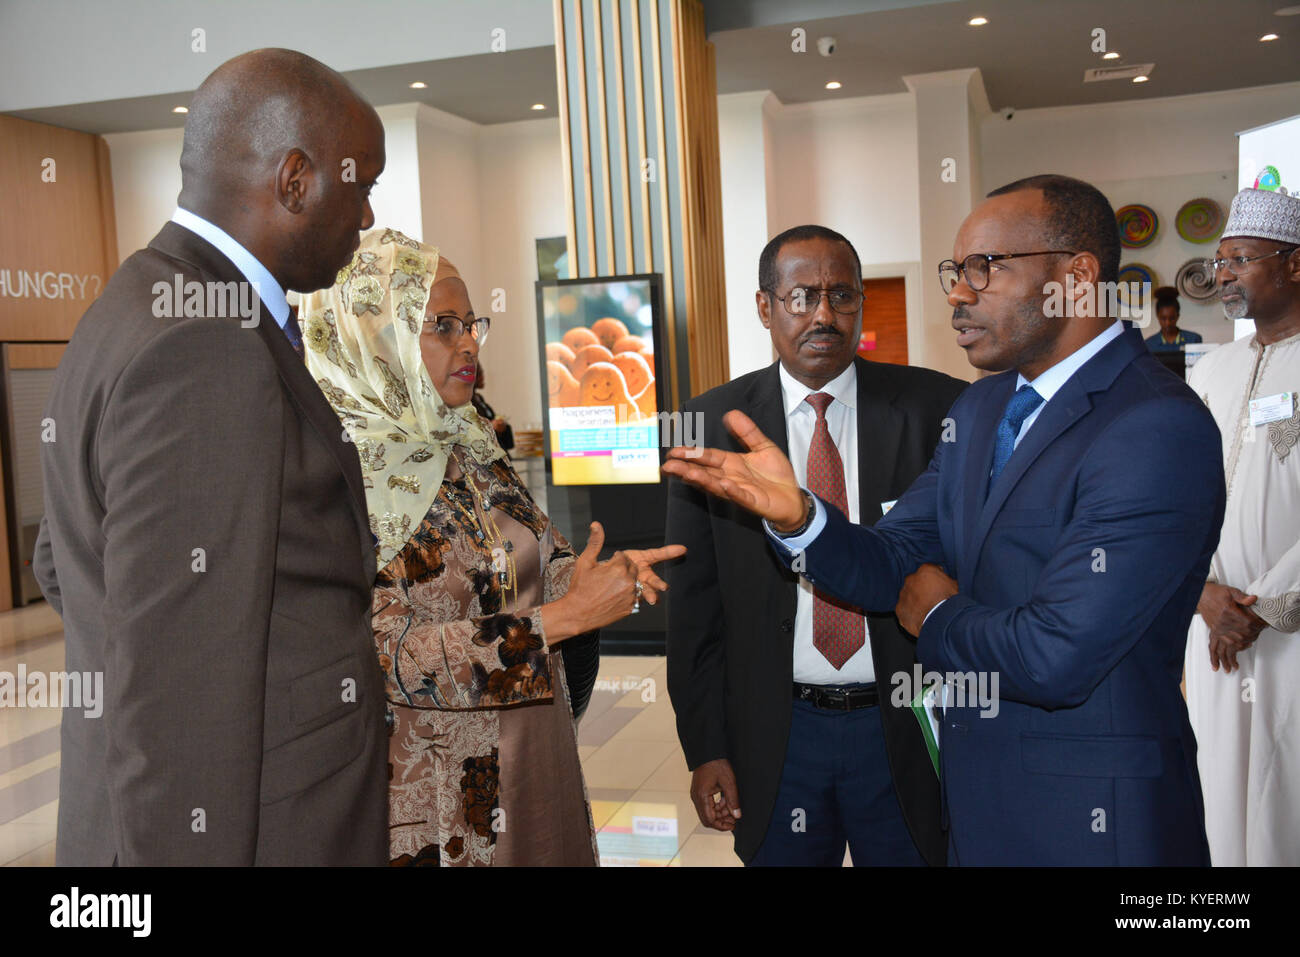 The Republic of Rwanda's Minister of State for Local Government Responsible for Socio-Economic Development Cyriaque Harelimana (right) interacts with the Chairperson of the National Independent Electoral Commission (NIEC) of Somalia, Ms. Halima Ismail Ibrahim (second from left), Dr. Dahir Jibreel, the NIEC Secretary-General (third), meet Mr. Serge Kubwimana (left), the United Nations Senior Political/Election Affairs Officer in the Electoral Assistance Division. This was on the sidelines of the 4th Annual Continental Forum on Election Management Bodies organized by the African Union Commission Stock Photo